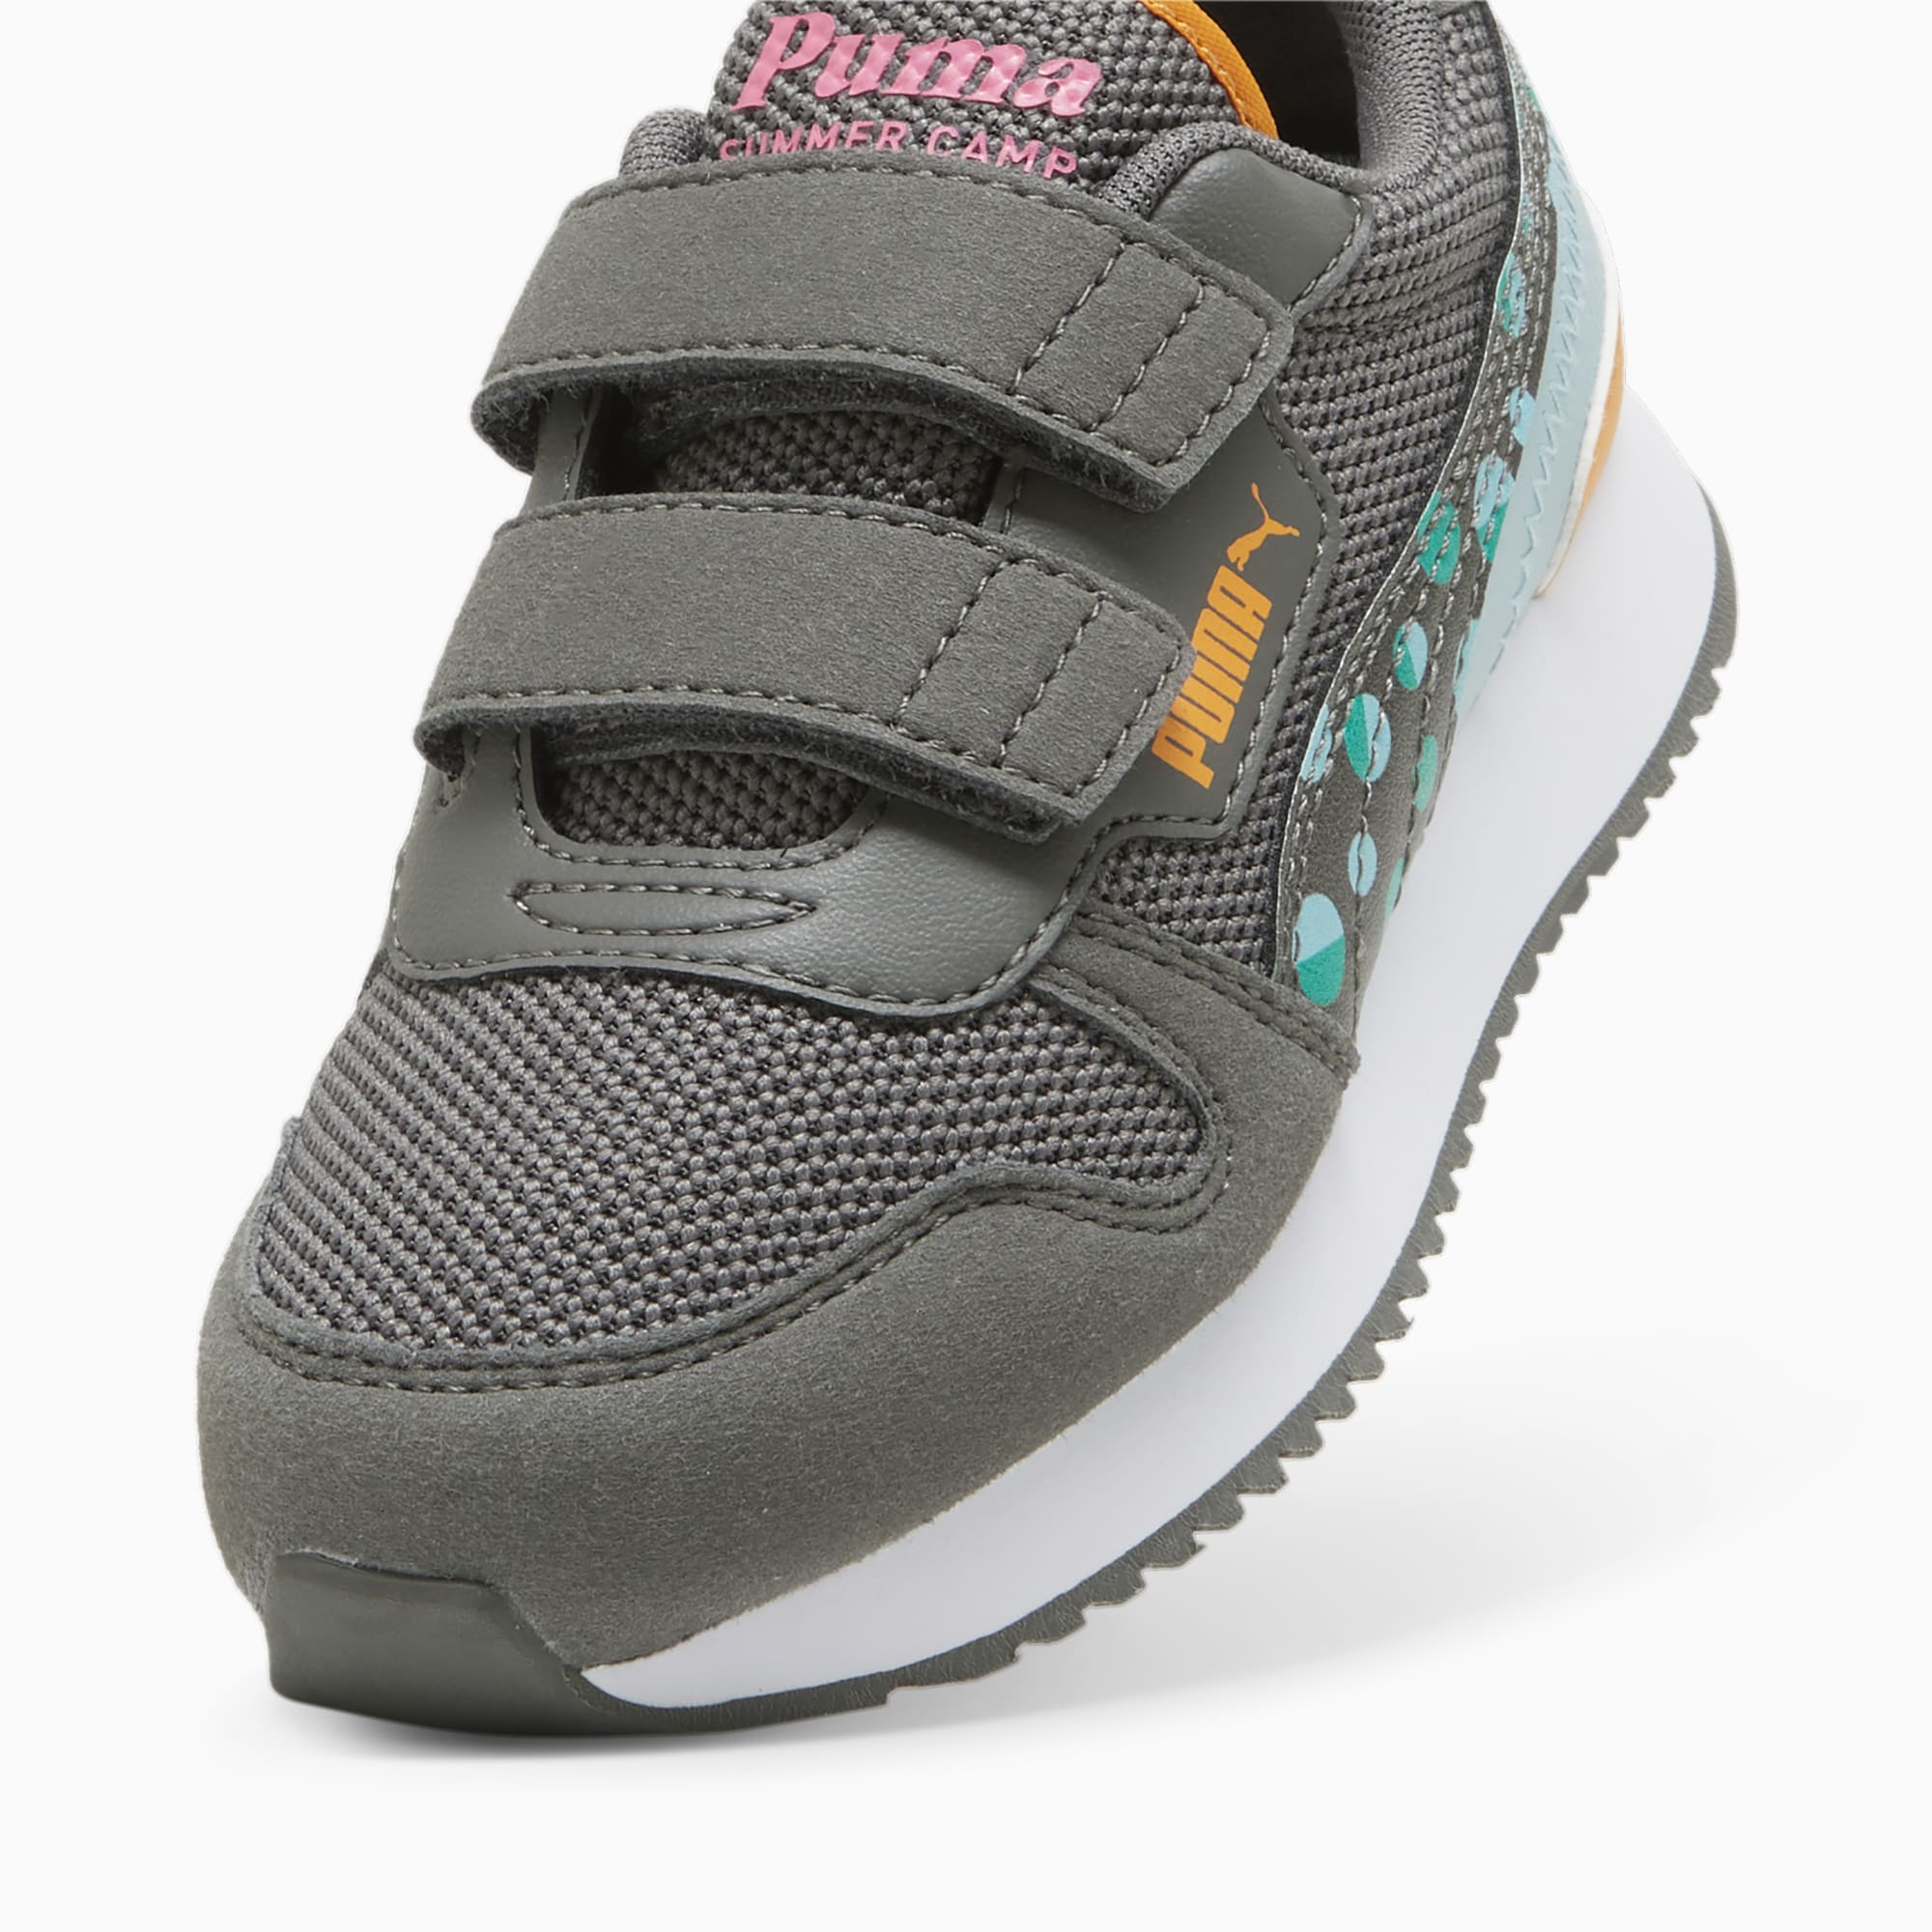 PUMA R78 Summer Camp Kids' Sneakers, Cool Dark Grey/Sparkling Green, Size 27,5, Shoes